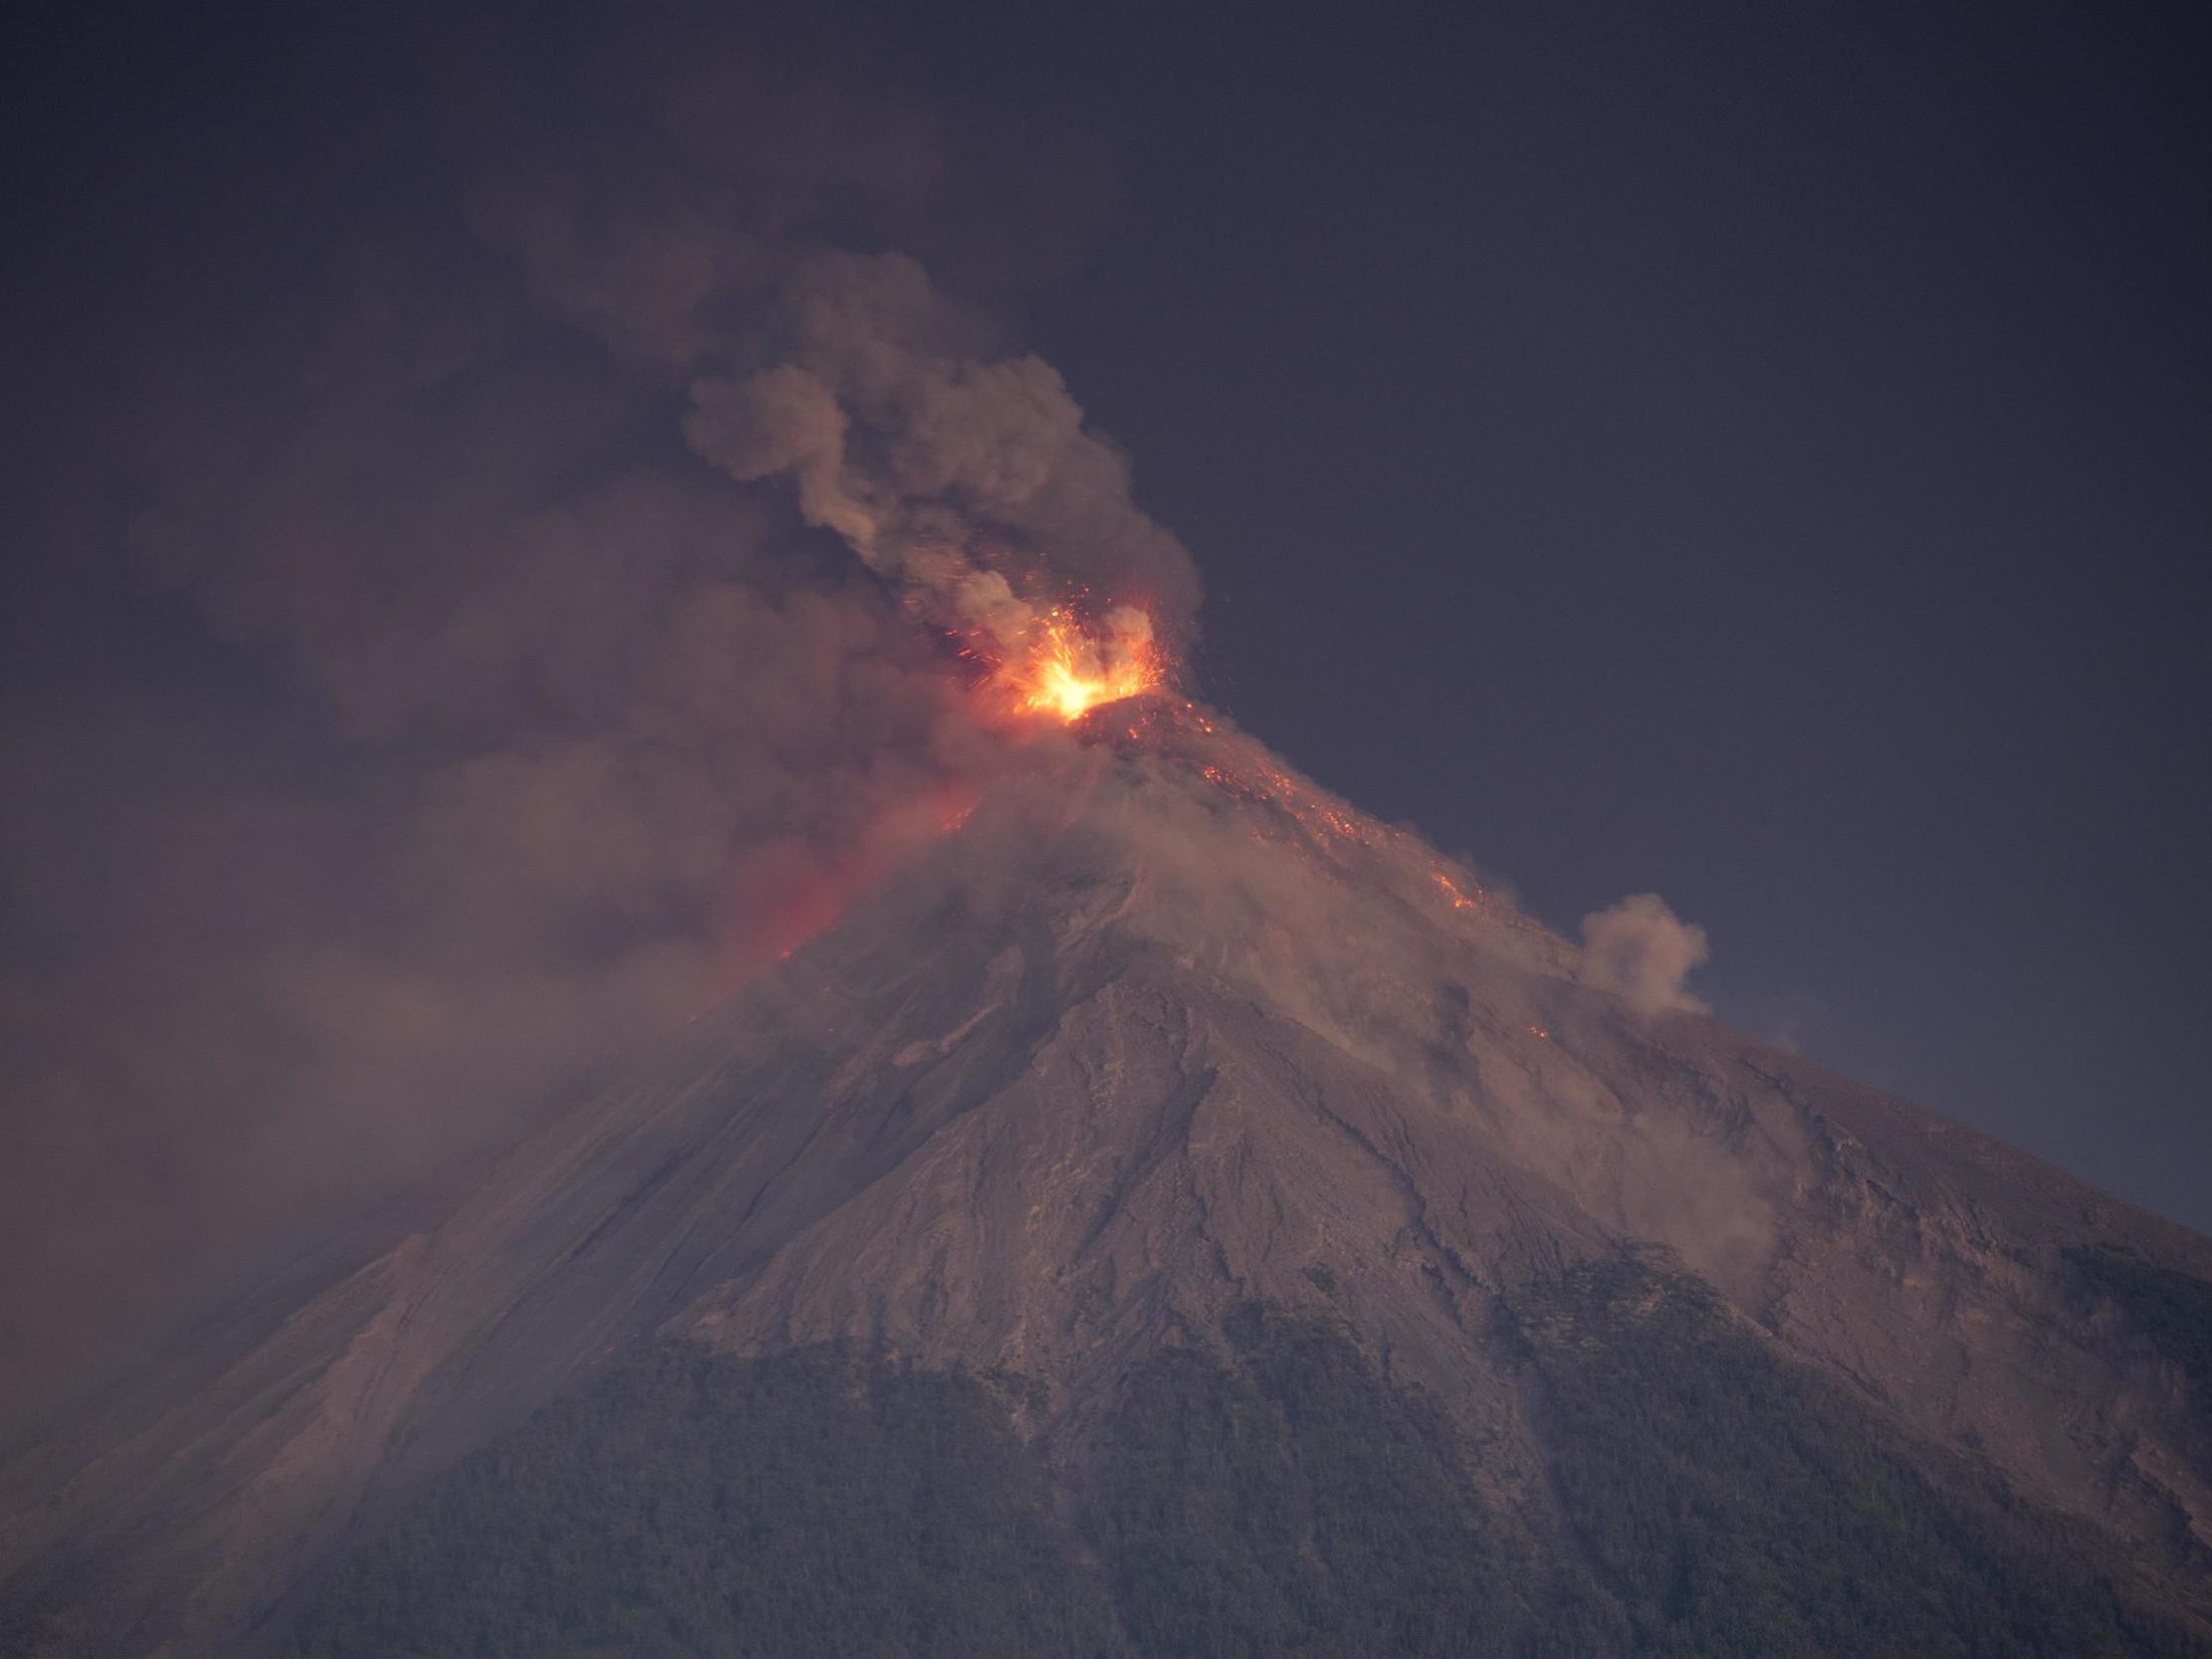 The Fuego volcano erupted in June, killing at least 194 people – possibly hundreds more